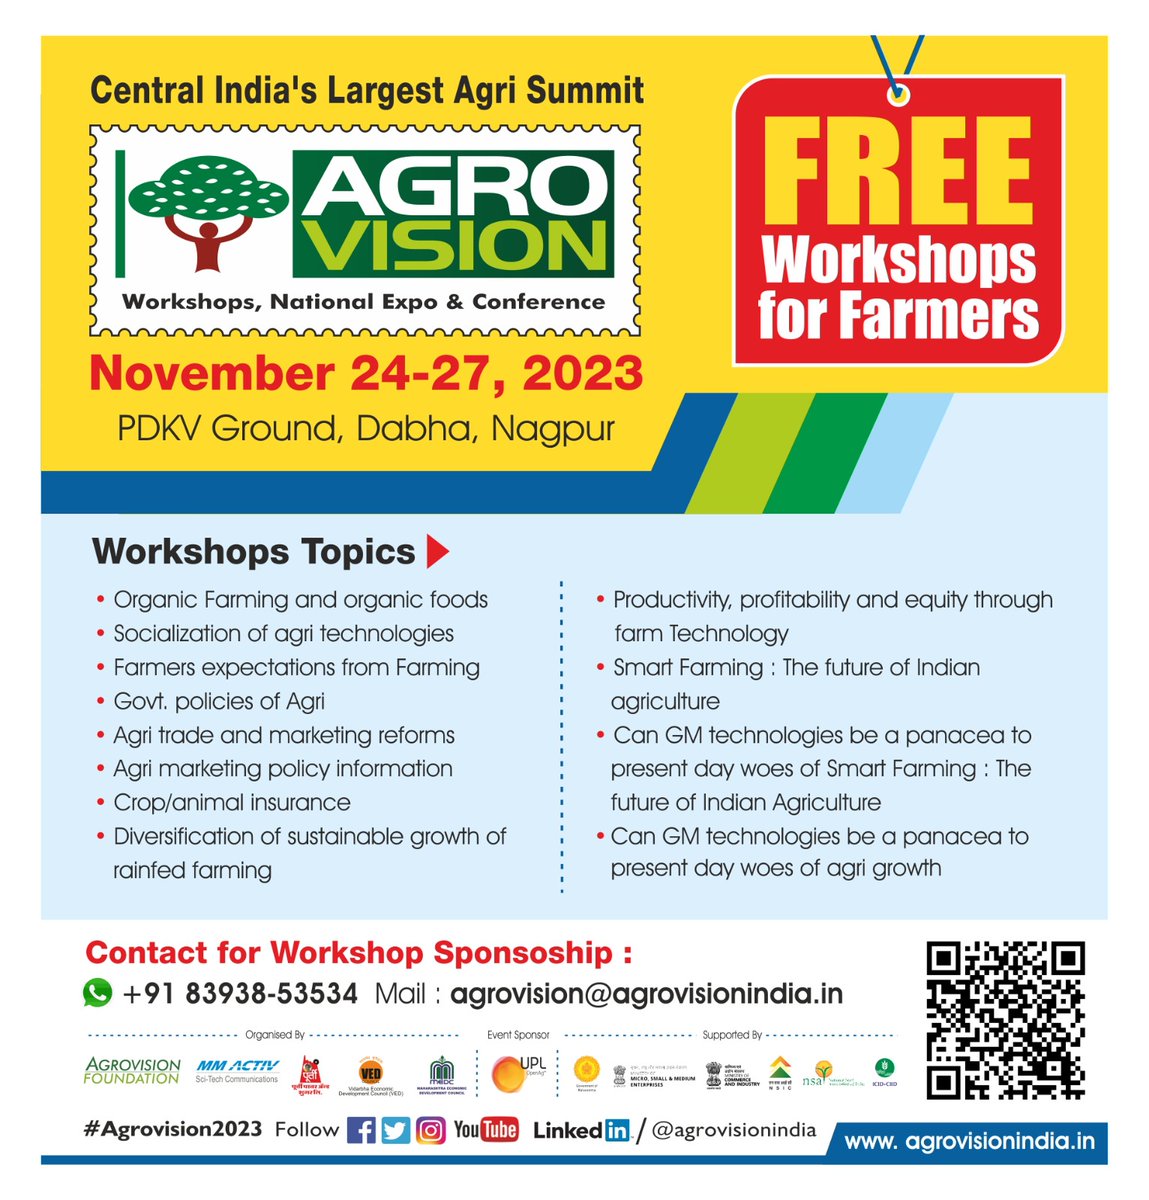 Nurturing Fields of Knowledge: Join us at Agrovision's Free Farmer Workshops, where we sow the seeds of agricultural wisdom for bountiful harvests!

#freeworkshops #farmerworkshop #agrovision2023 #agrovisionworkshop #nationalexpo